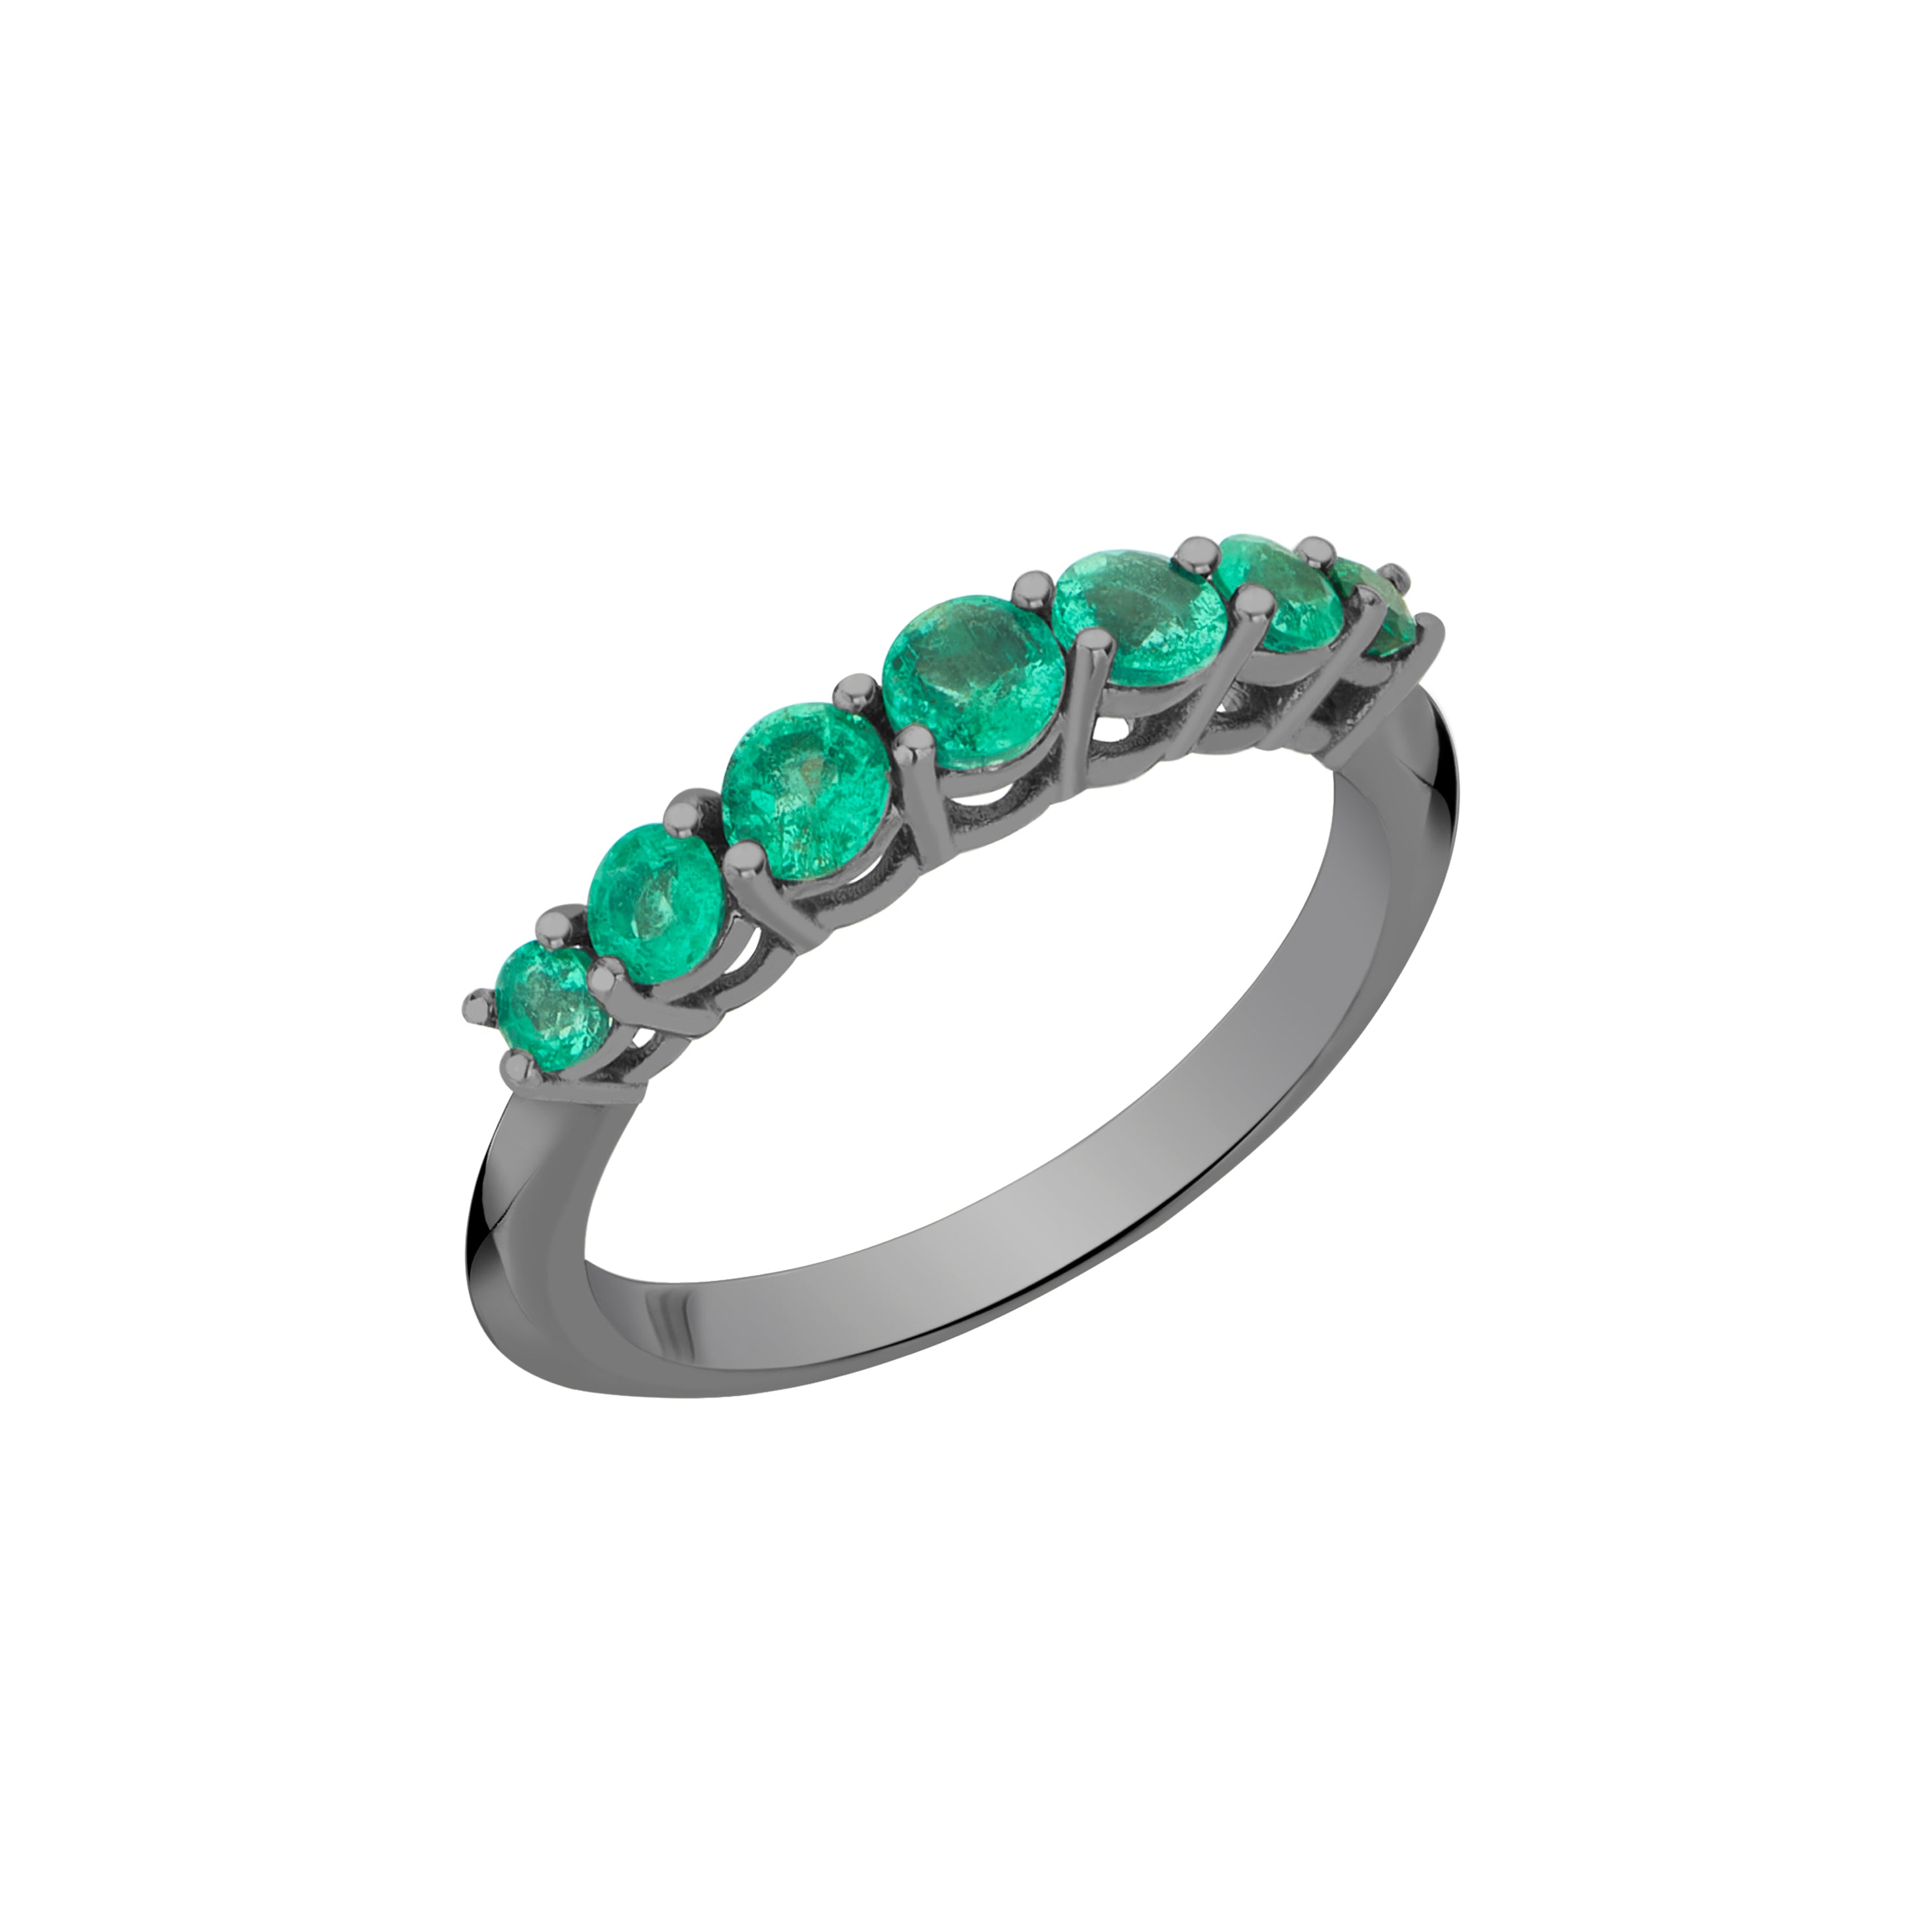 SMALL ROCK STAR RING IN BLACK RHODIUM PLATED 18K WHITE GOLD WITH EMERALD